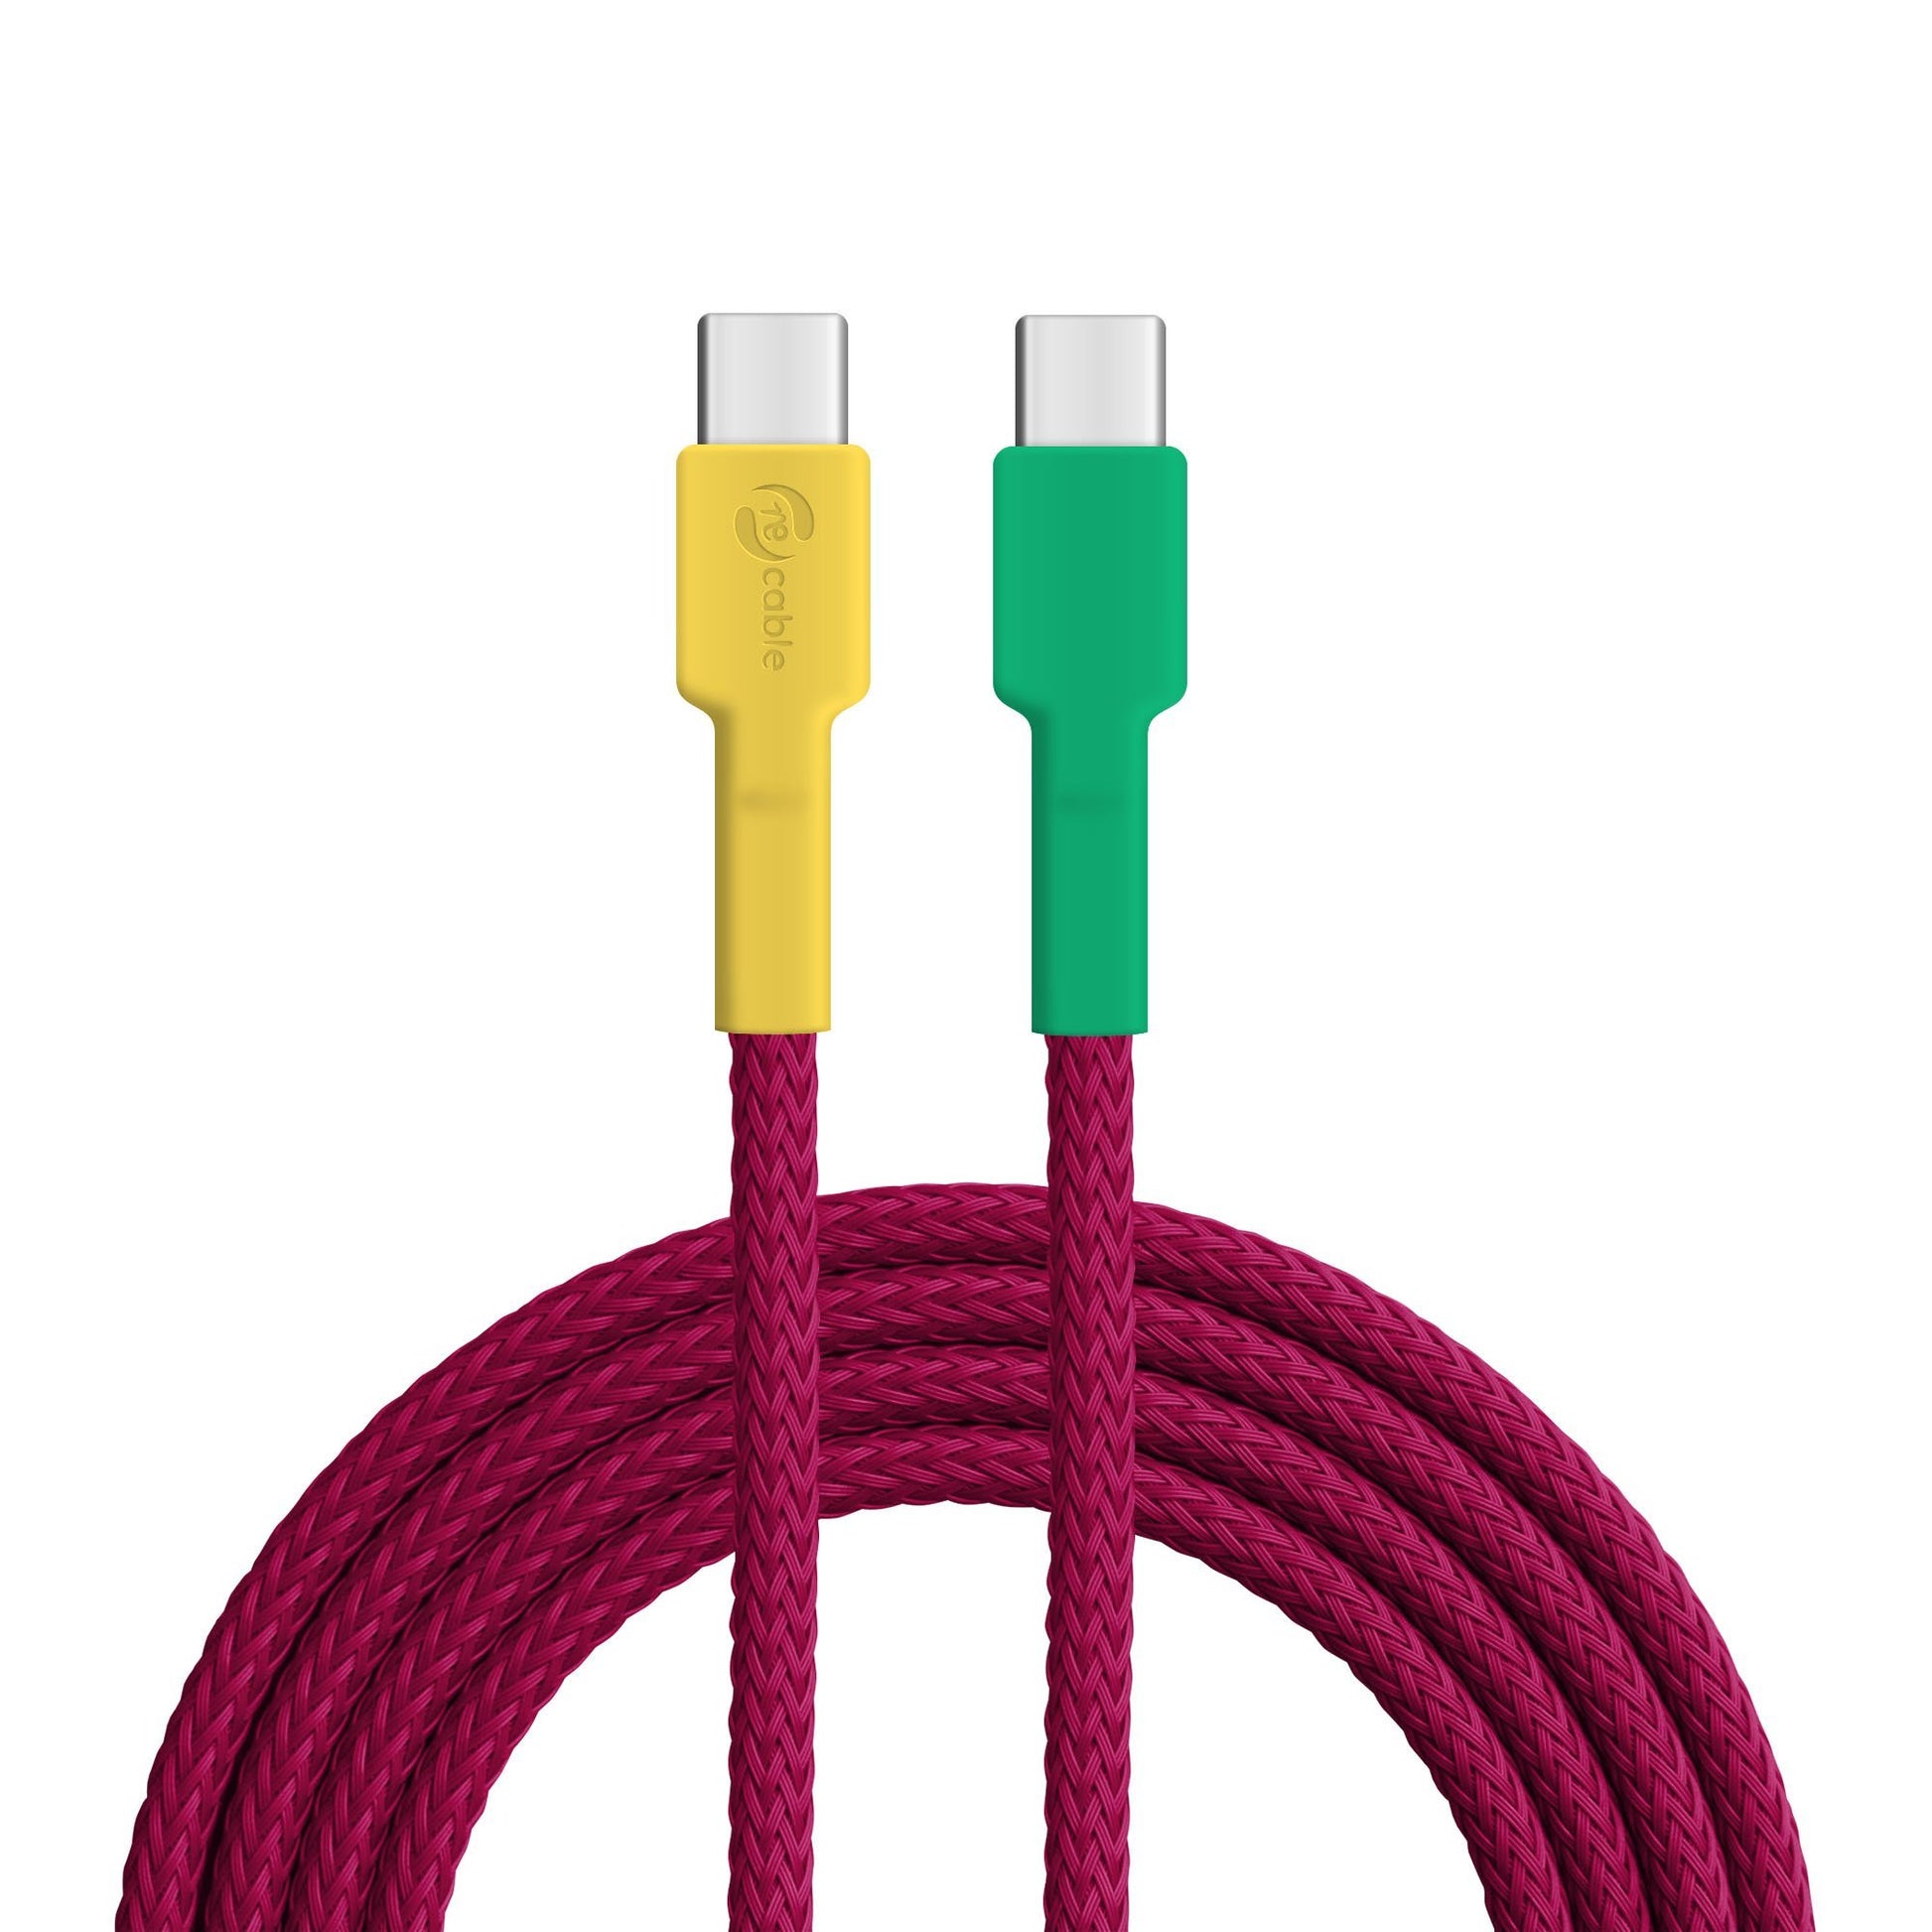 USB cable, Design: Gouldian finch, Connections: USB C on USB C